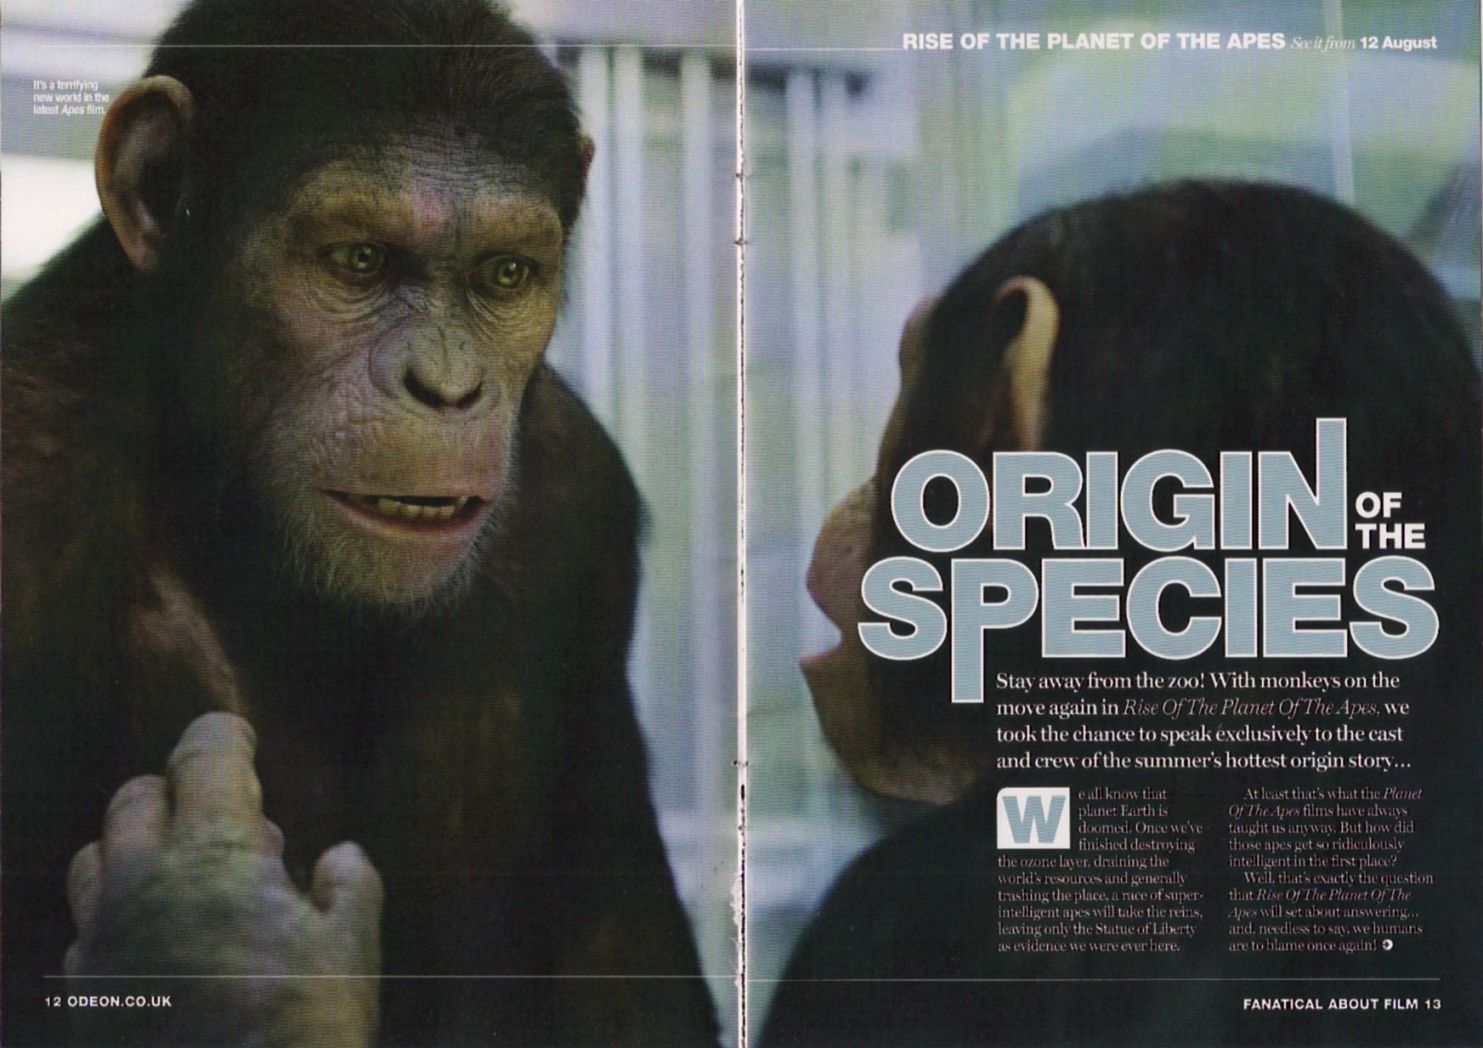 Odeon - Aug 2011 - Origin of the Species - Page 2
Keywords: rise_planet_apes_media;